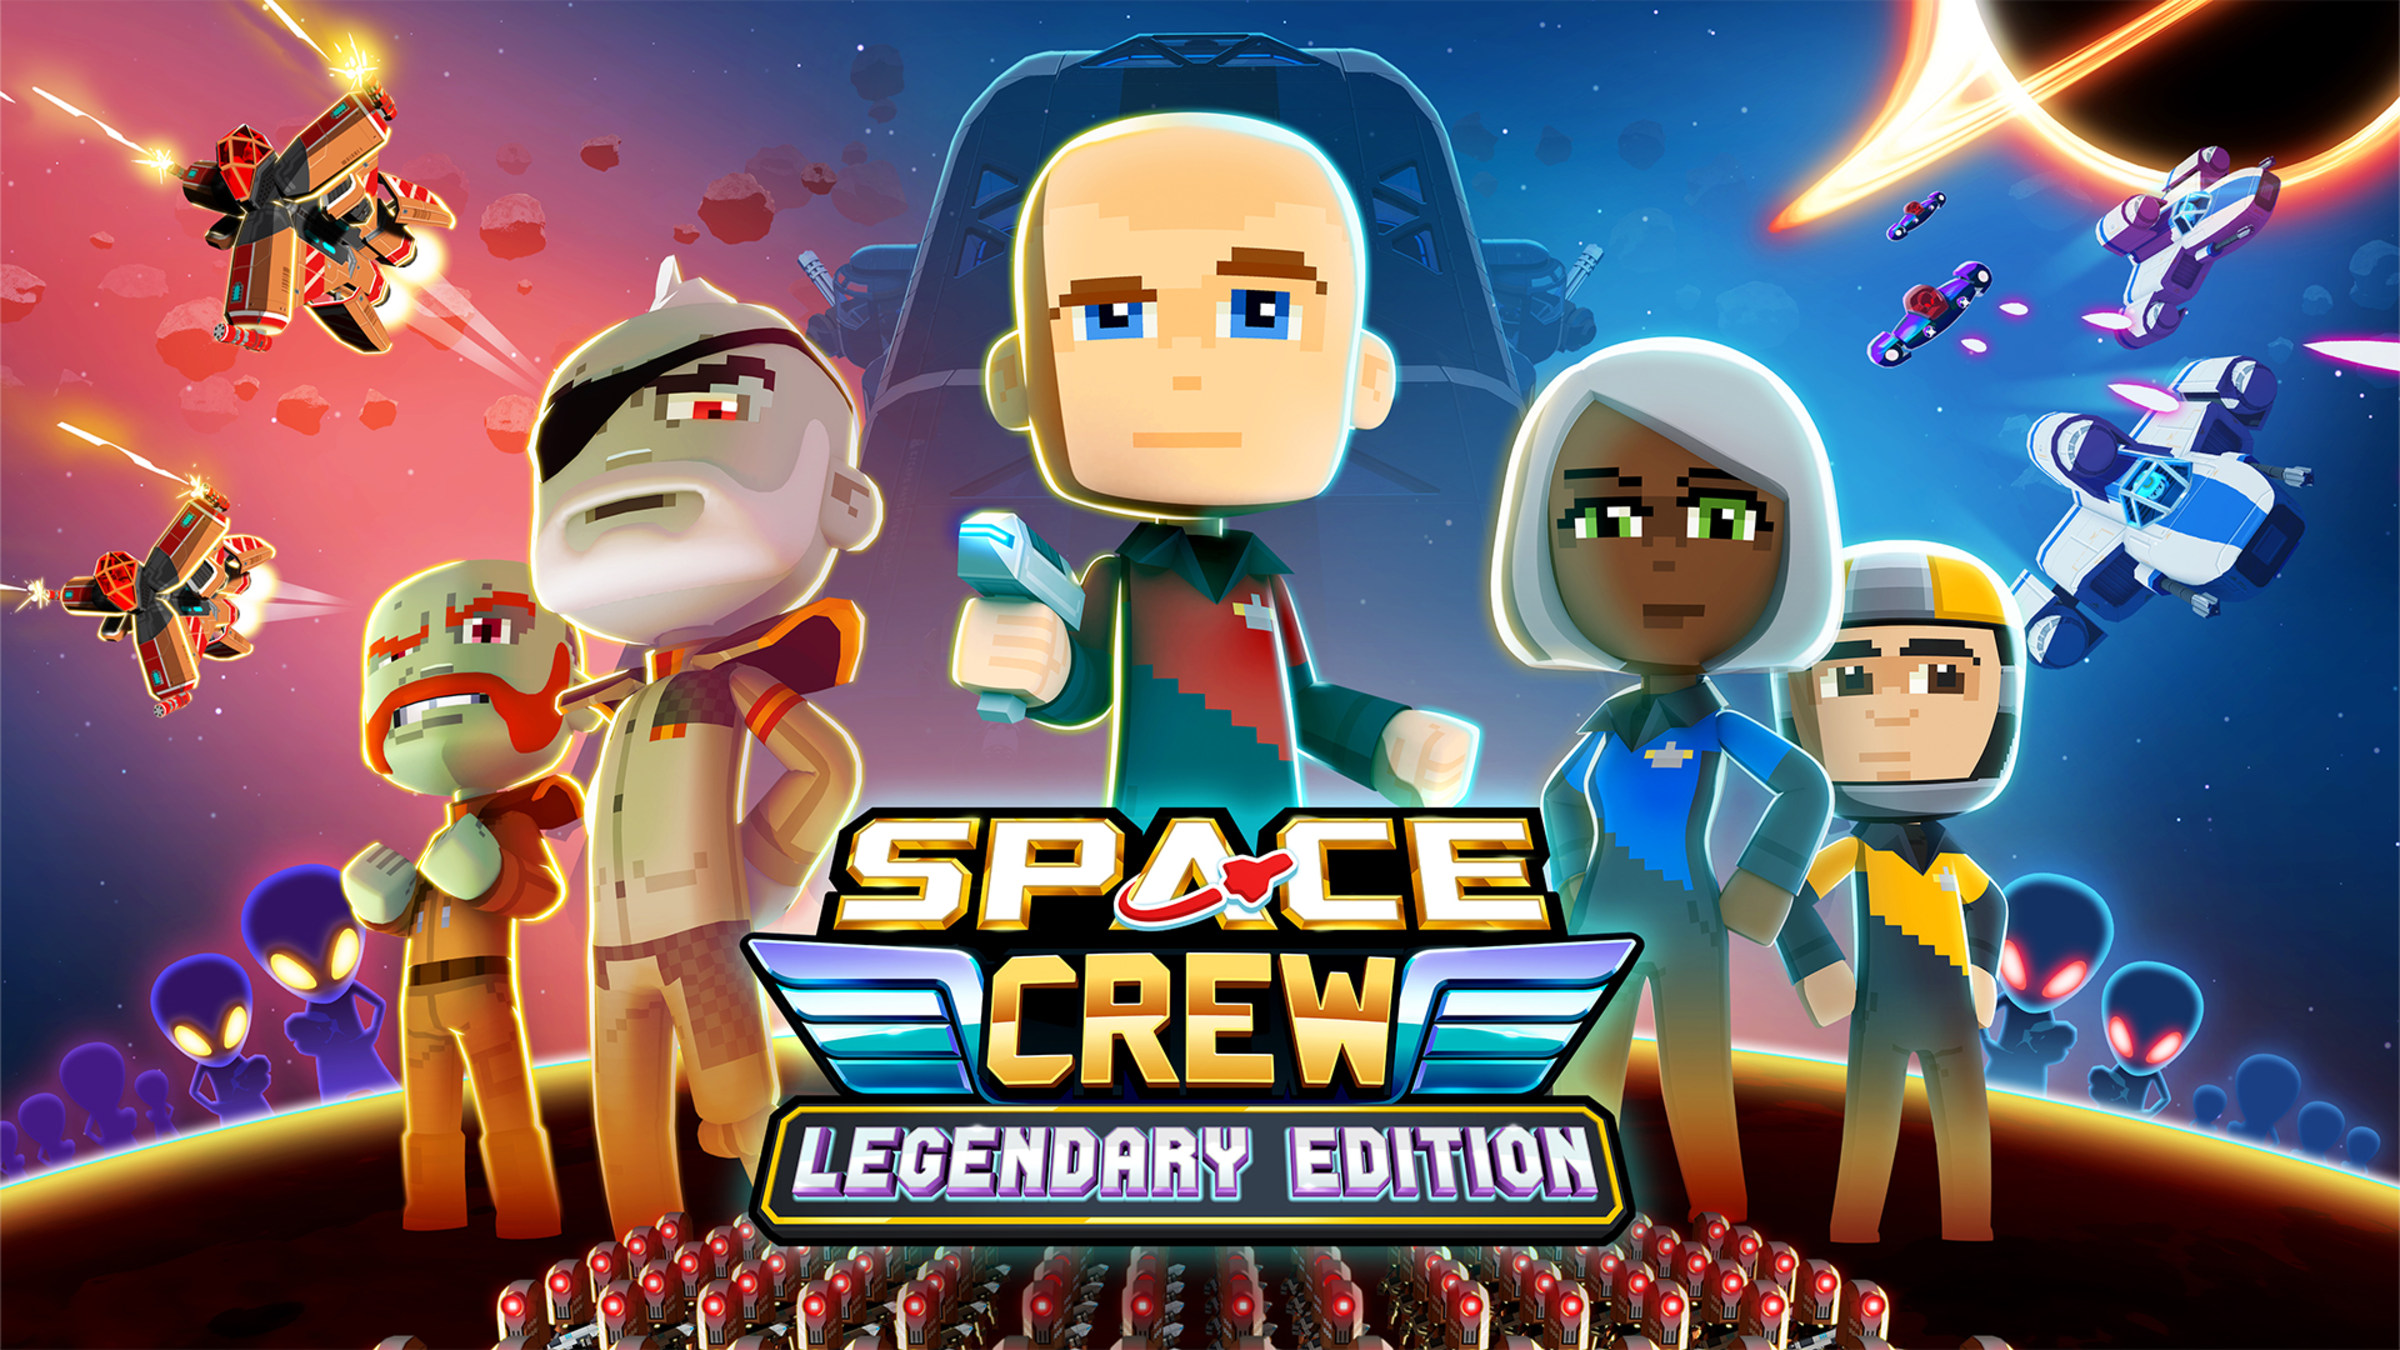 Space Crew: Legendary for Nintendo Switch - Official